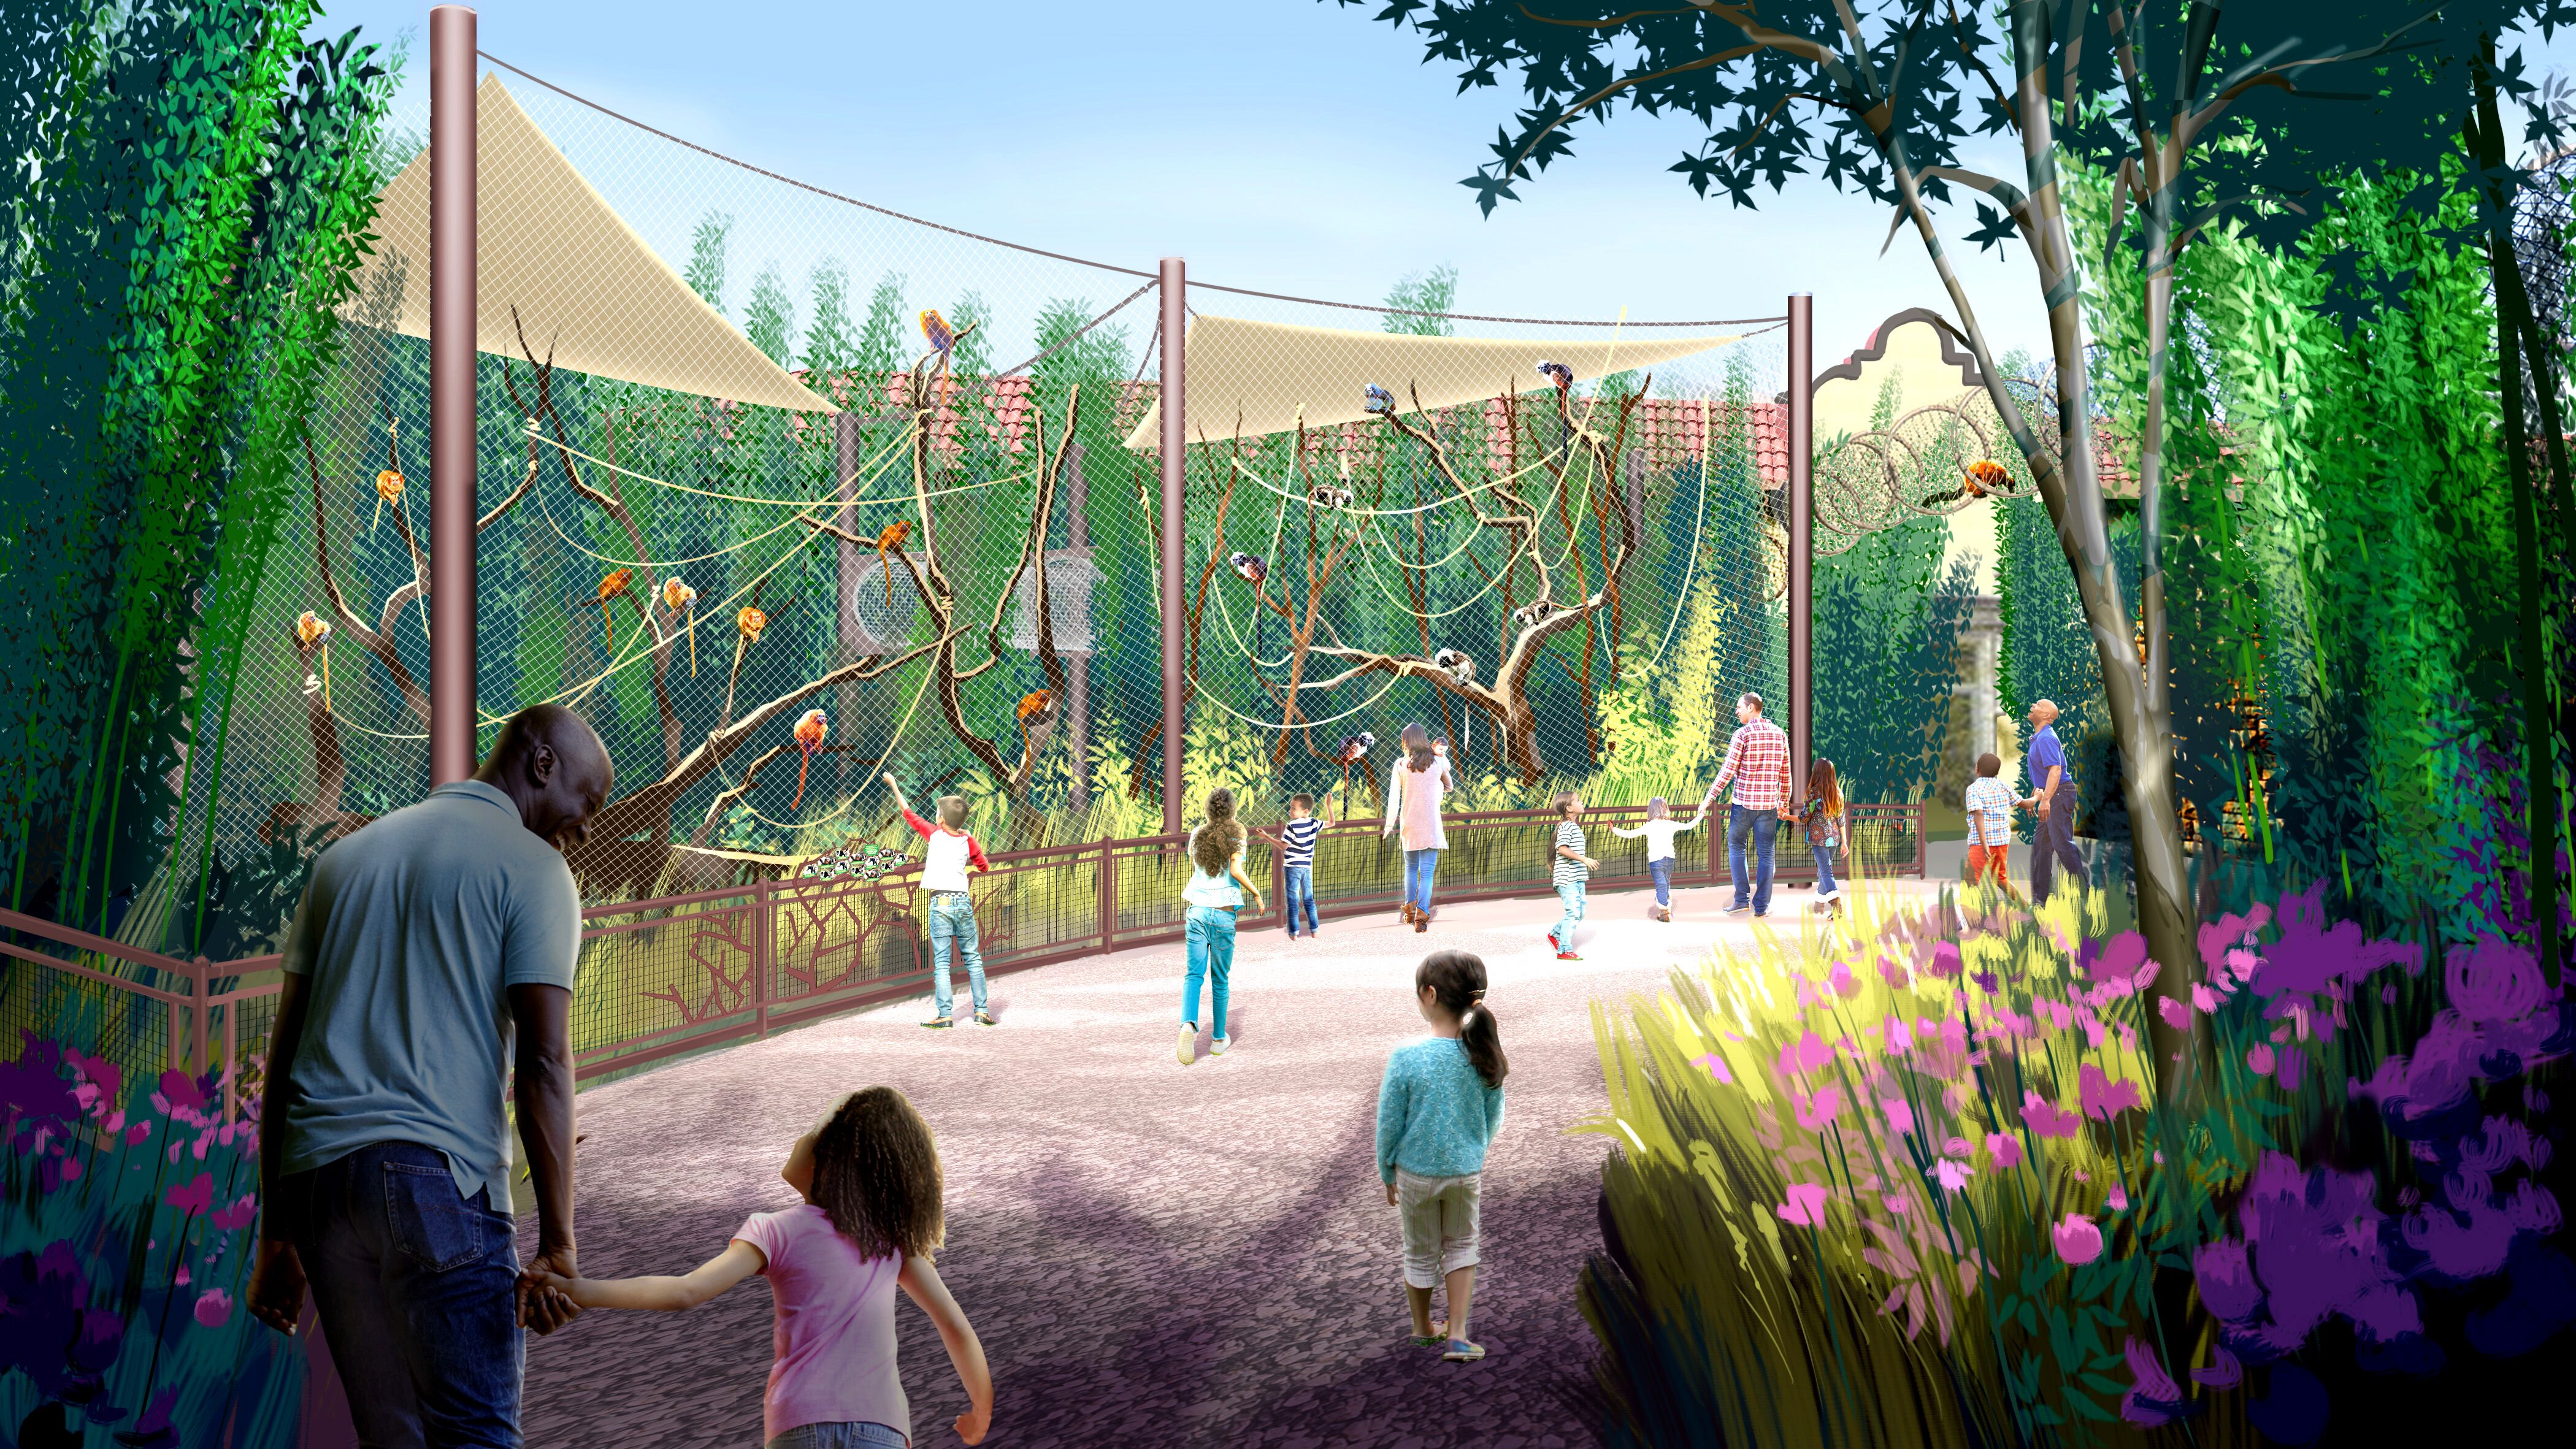 St. Louis Zoo will build more naturalistic habitat for monkeys, set to open in 2021 - Call ...